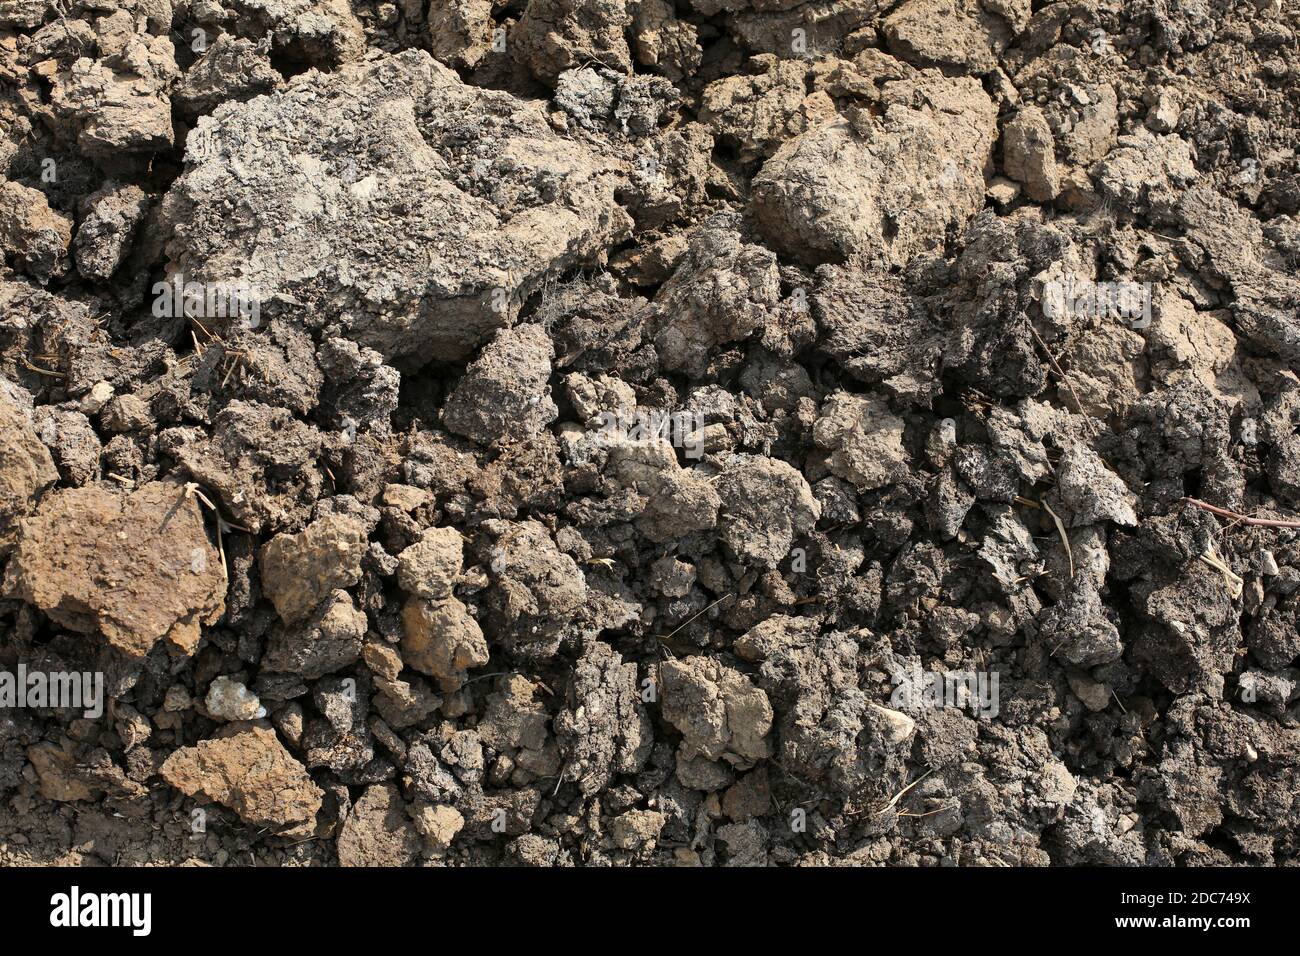 Freshly tilled soil in an agricultural field Stock Photo